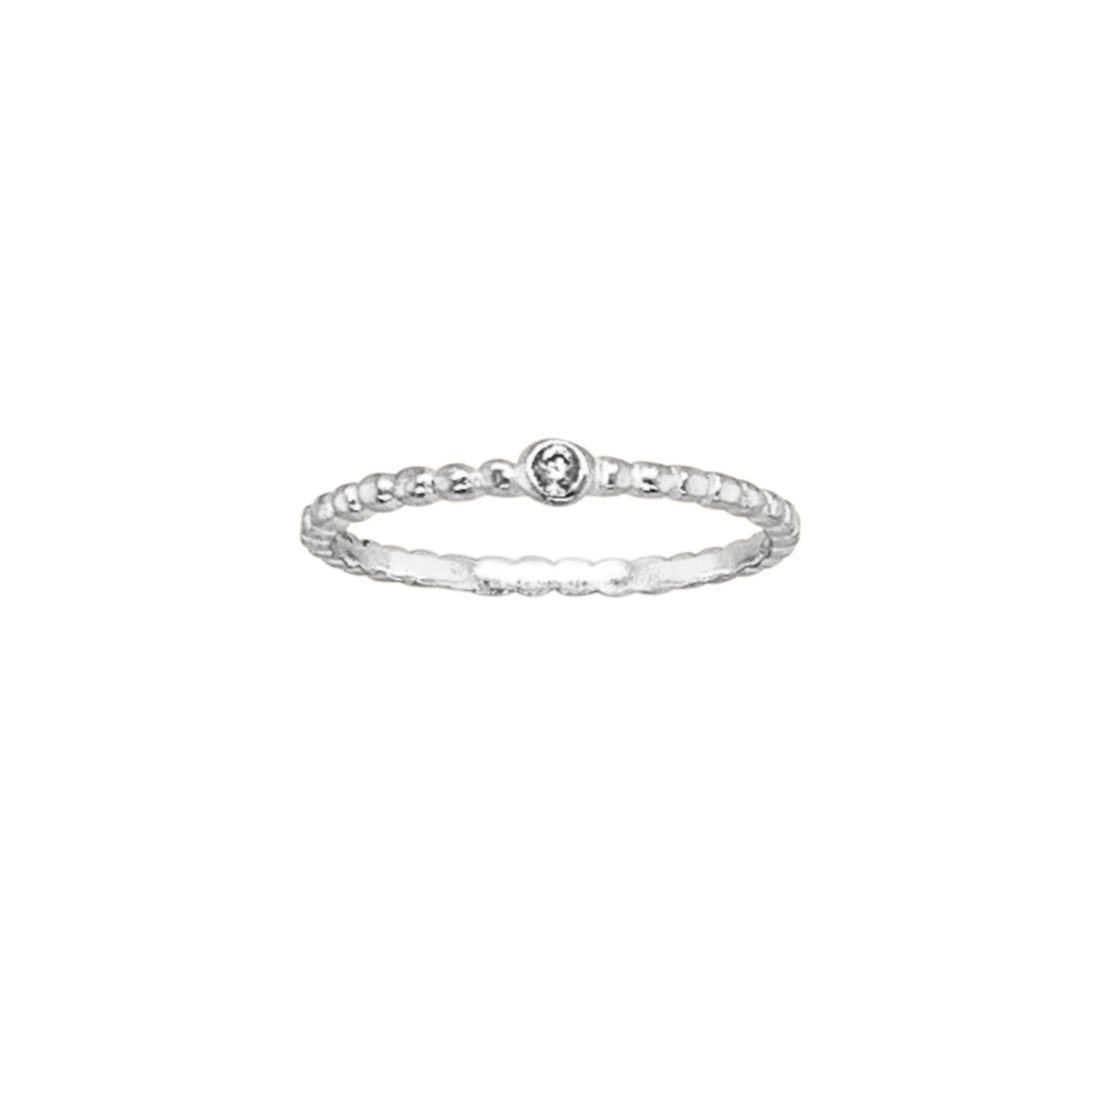 Sterling Silver Beaded Band Ring with White Cubic Zirconia Rings Bevilles 